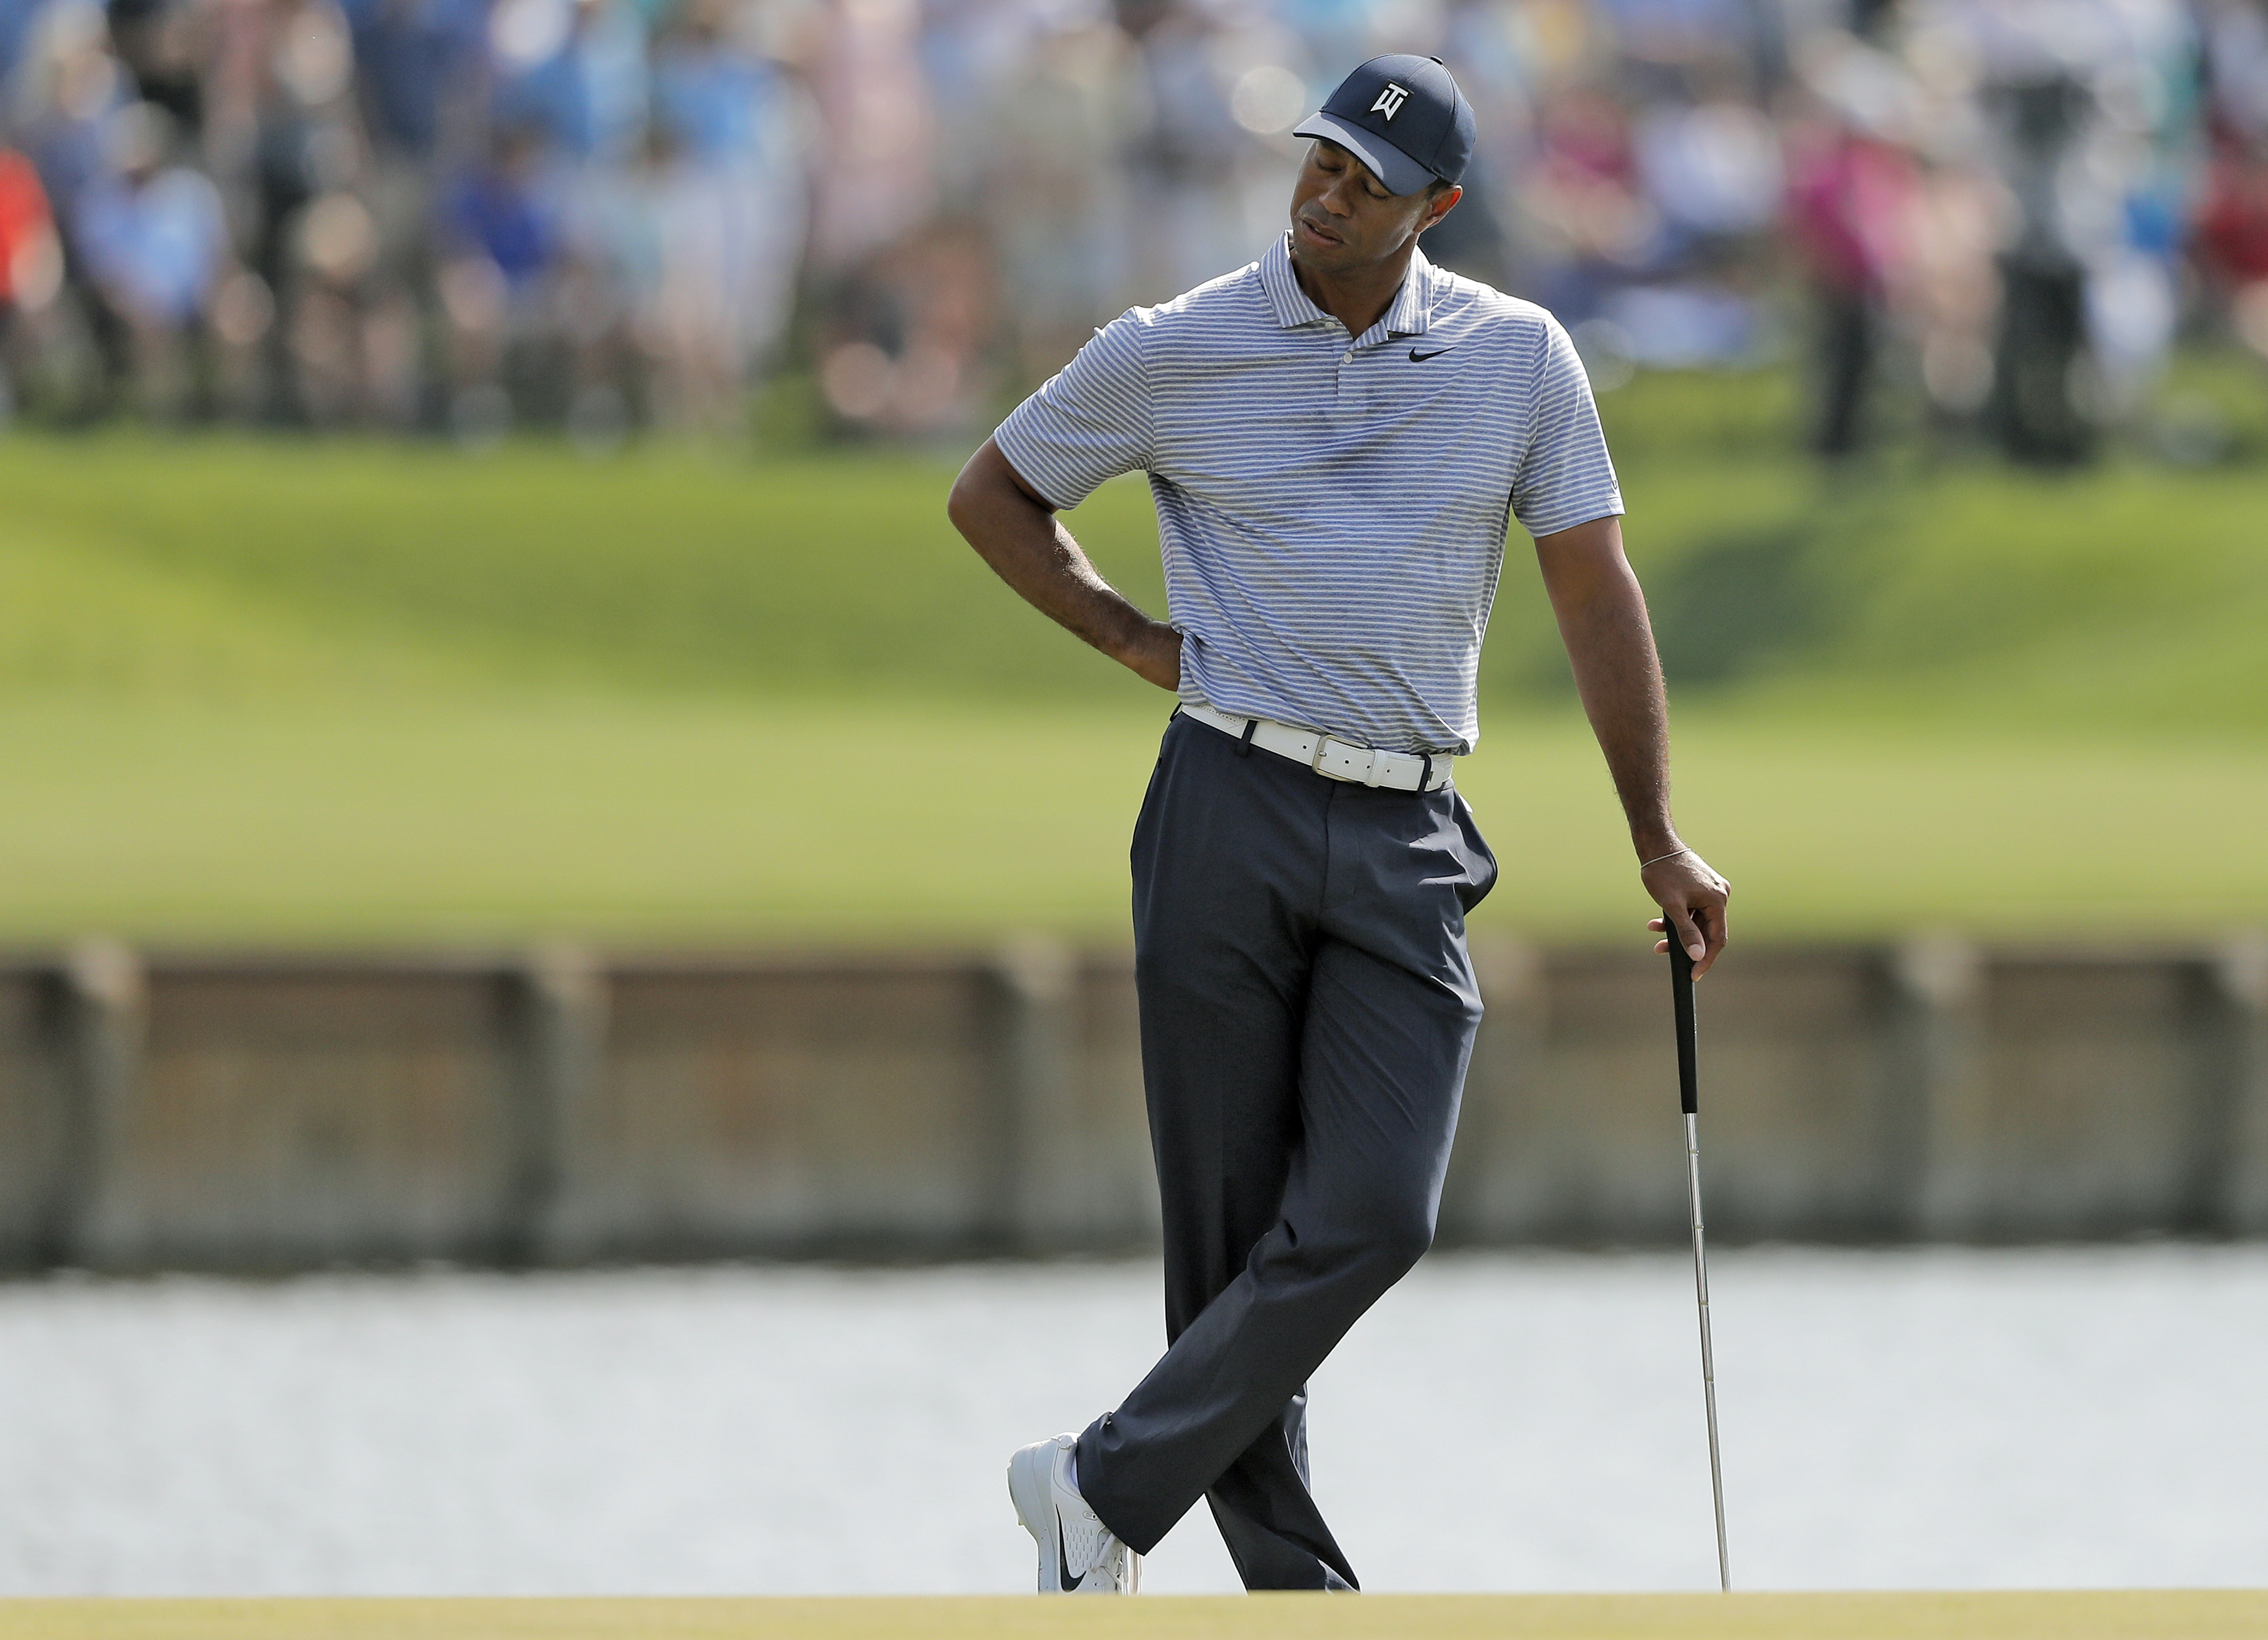 New rules could have helped Woods on 17th hole at Sawgrass